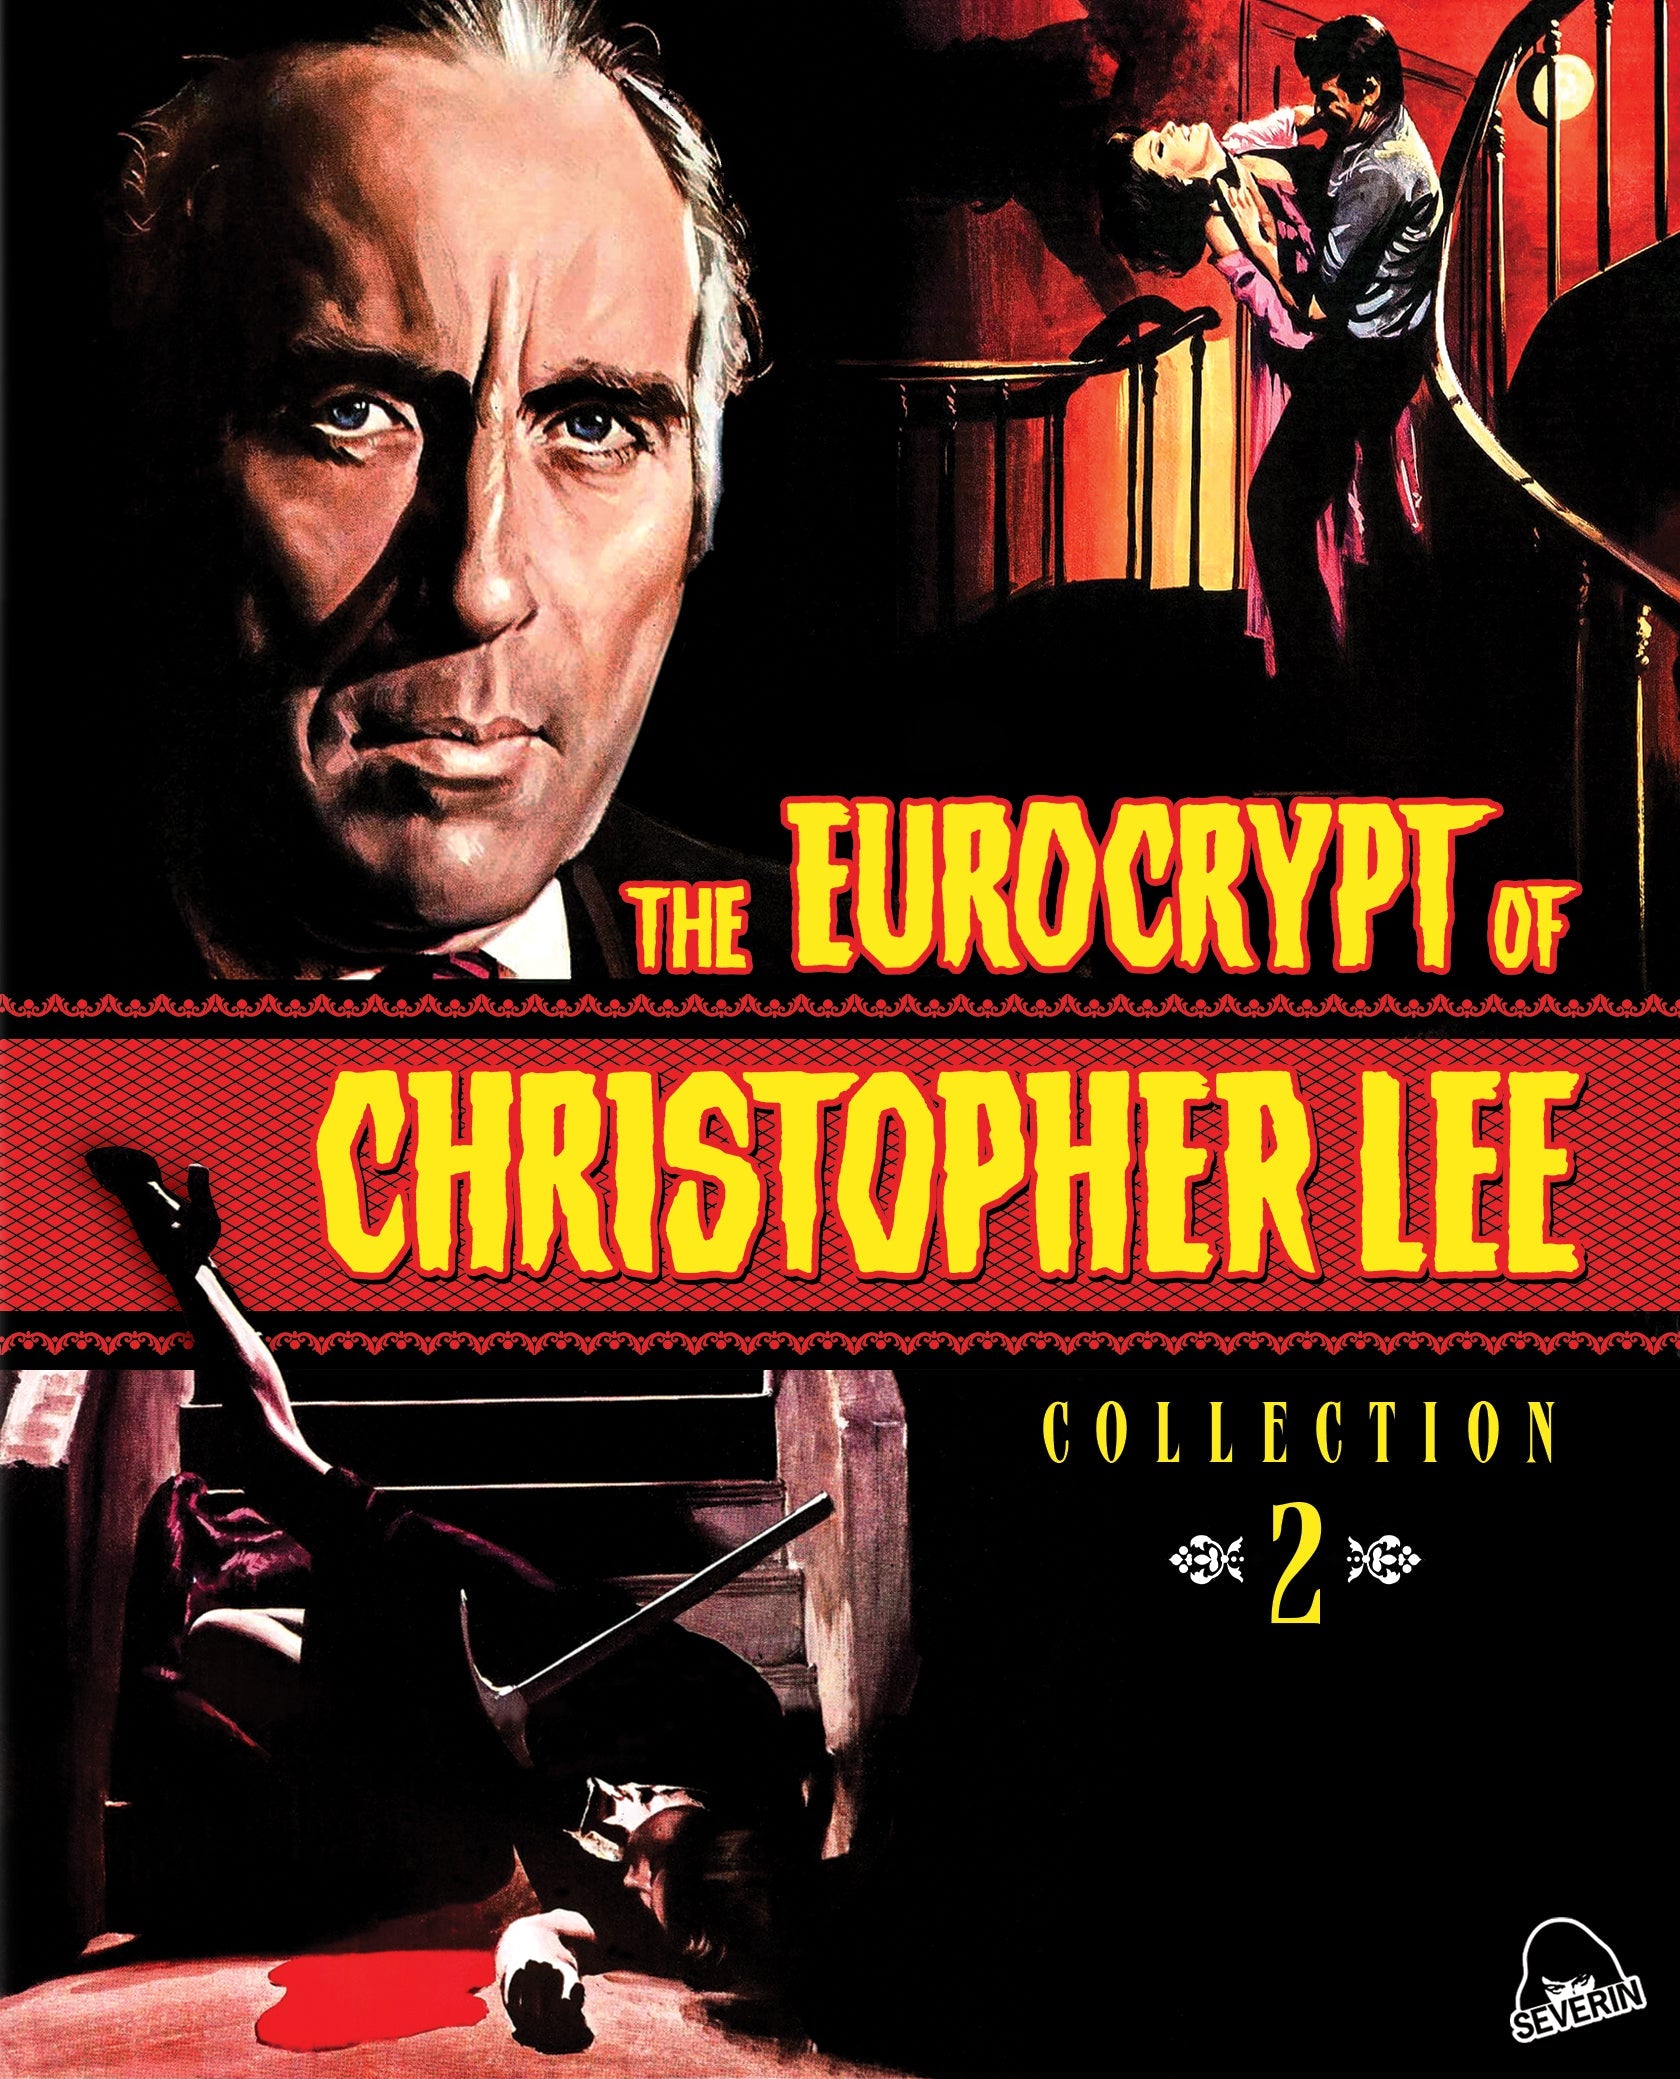 THE EUROCRYPT OF CHRISTOPHER LEE COLLECTION 2 (LIMITED EDITION) BLU-RAY/CD [SCRATCH AND DENT]